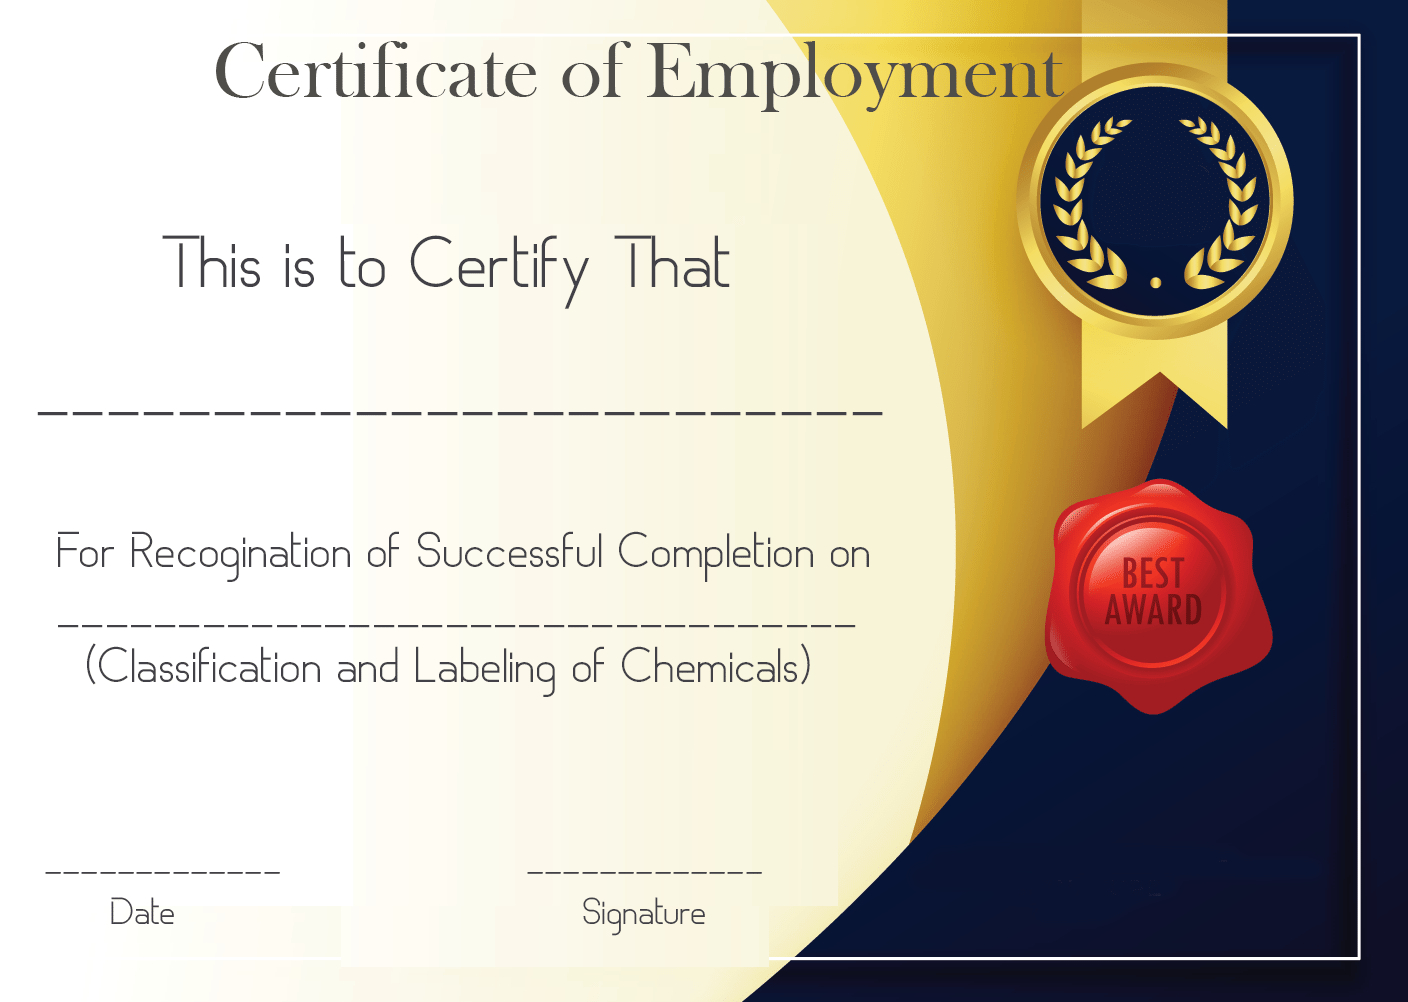 Free Sample Certificate Of Employment Template | Certificate Intended For Template Of Certificate Of Employment